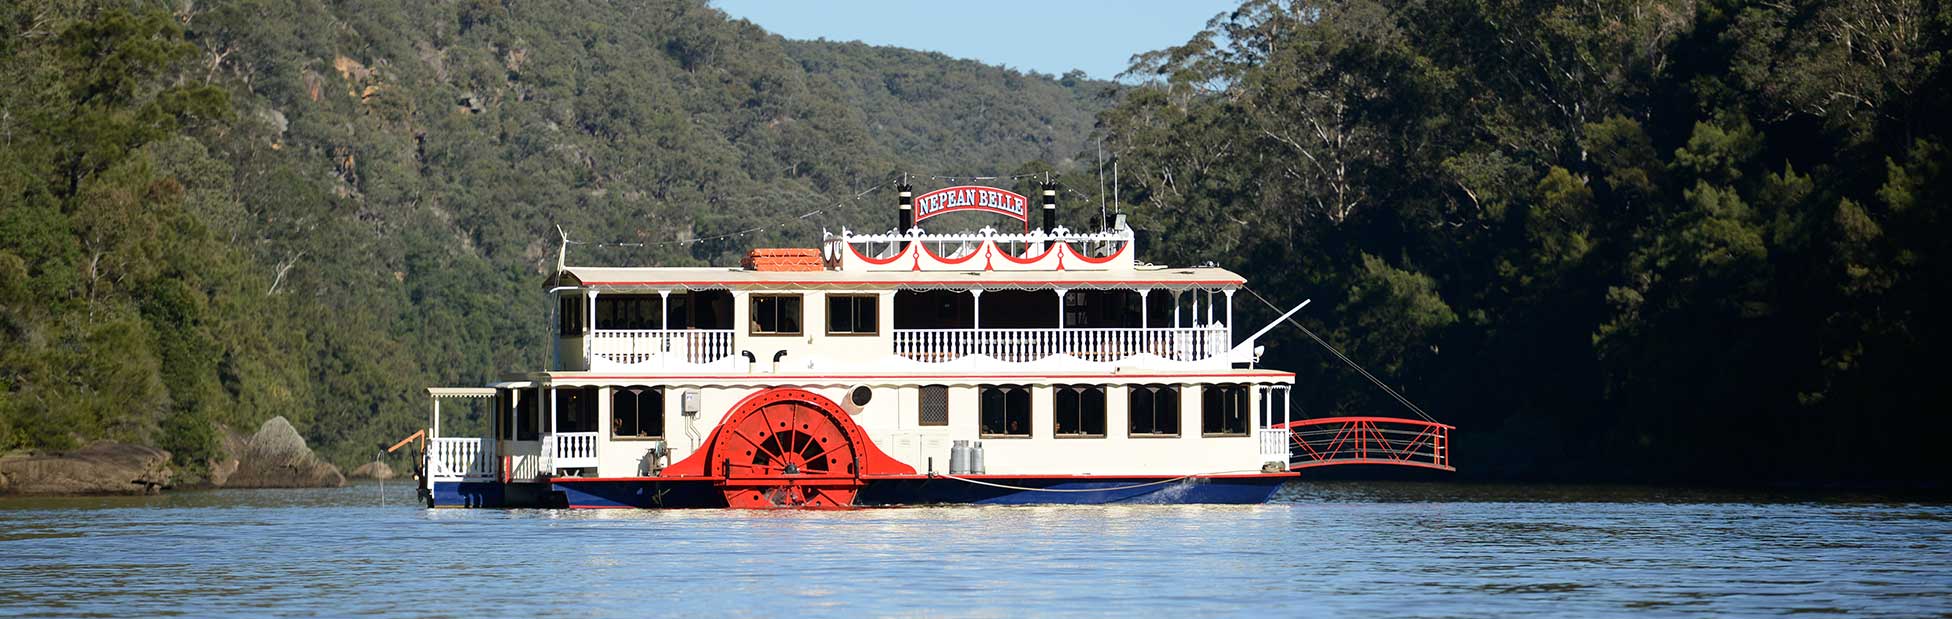 Nepean Belle Paddlewheeler on Nepean River on sunny day